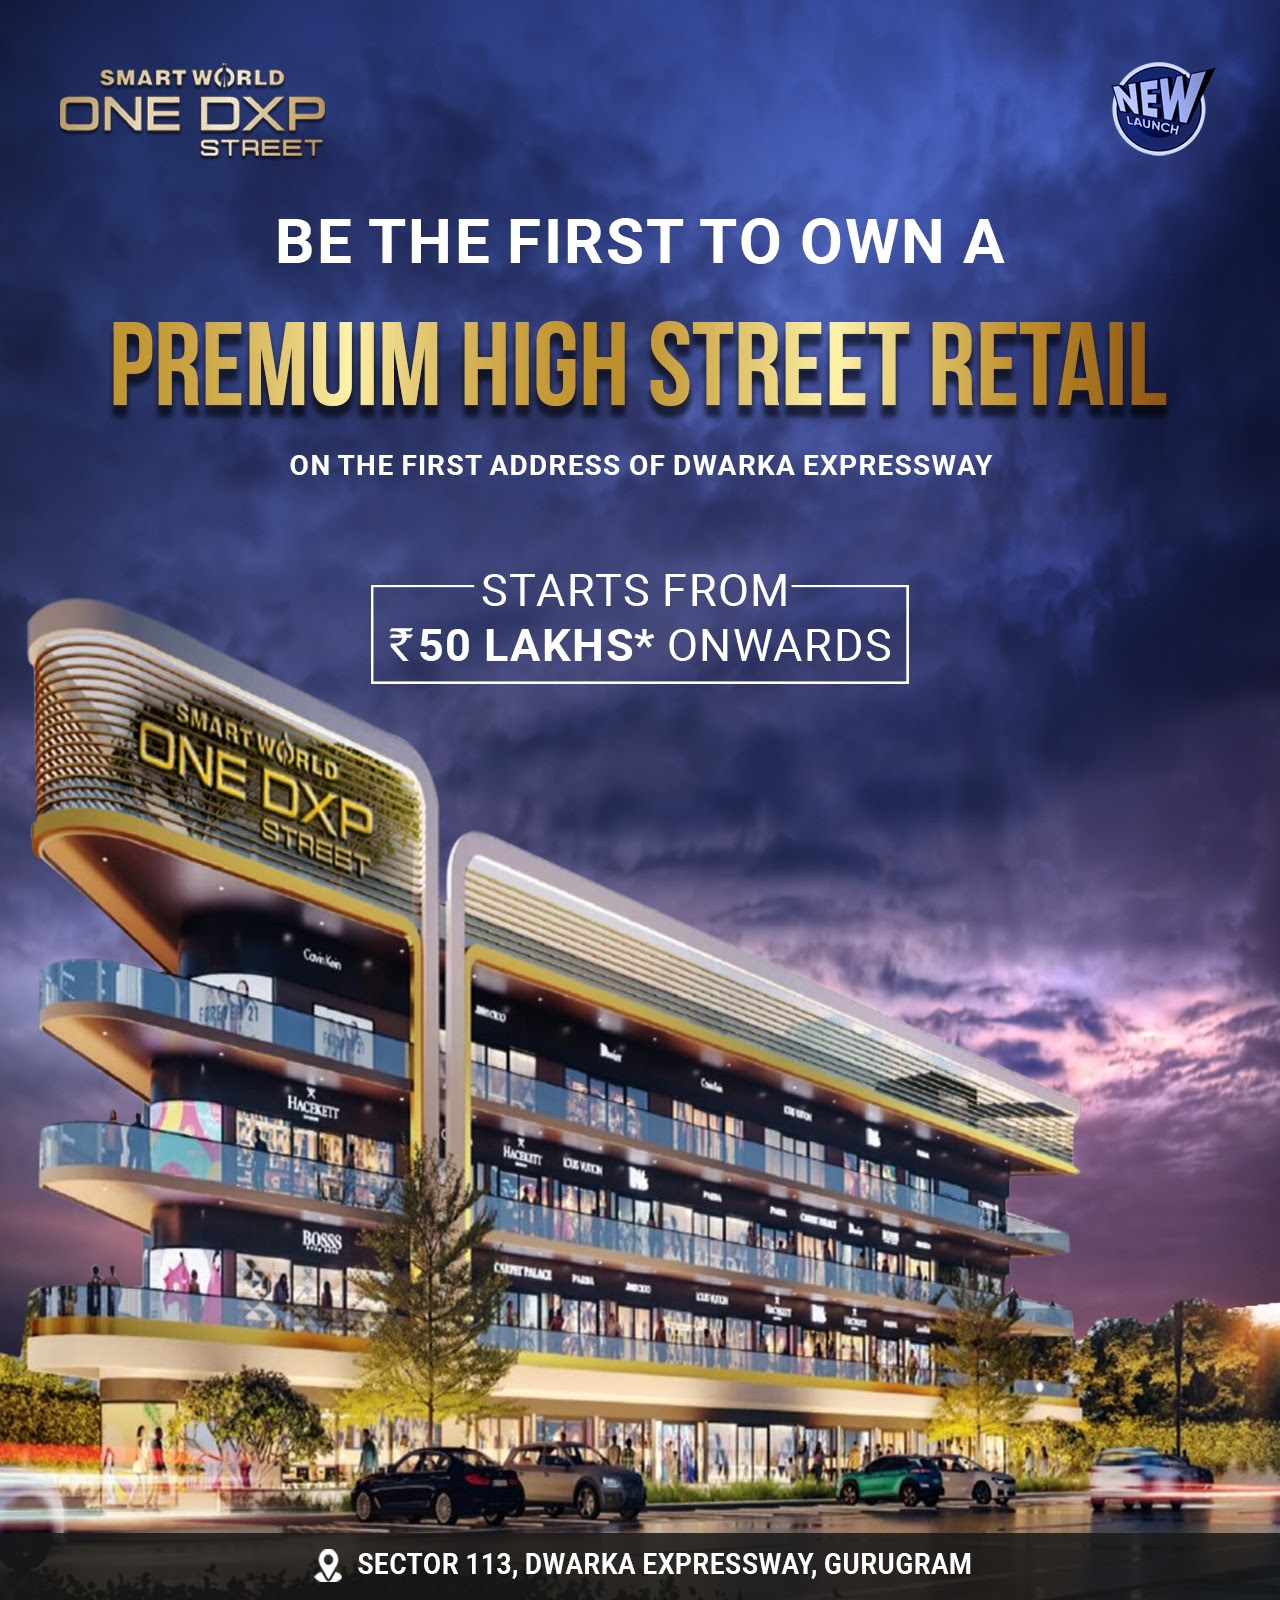 Premium hoigh street retail Rs 50 Lac onwards at Smart World One Dxp Street in Sector 113, Gurgaon